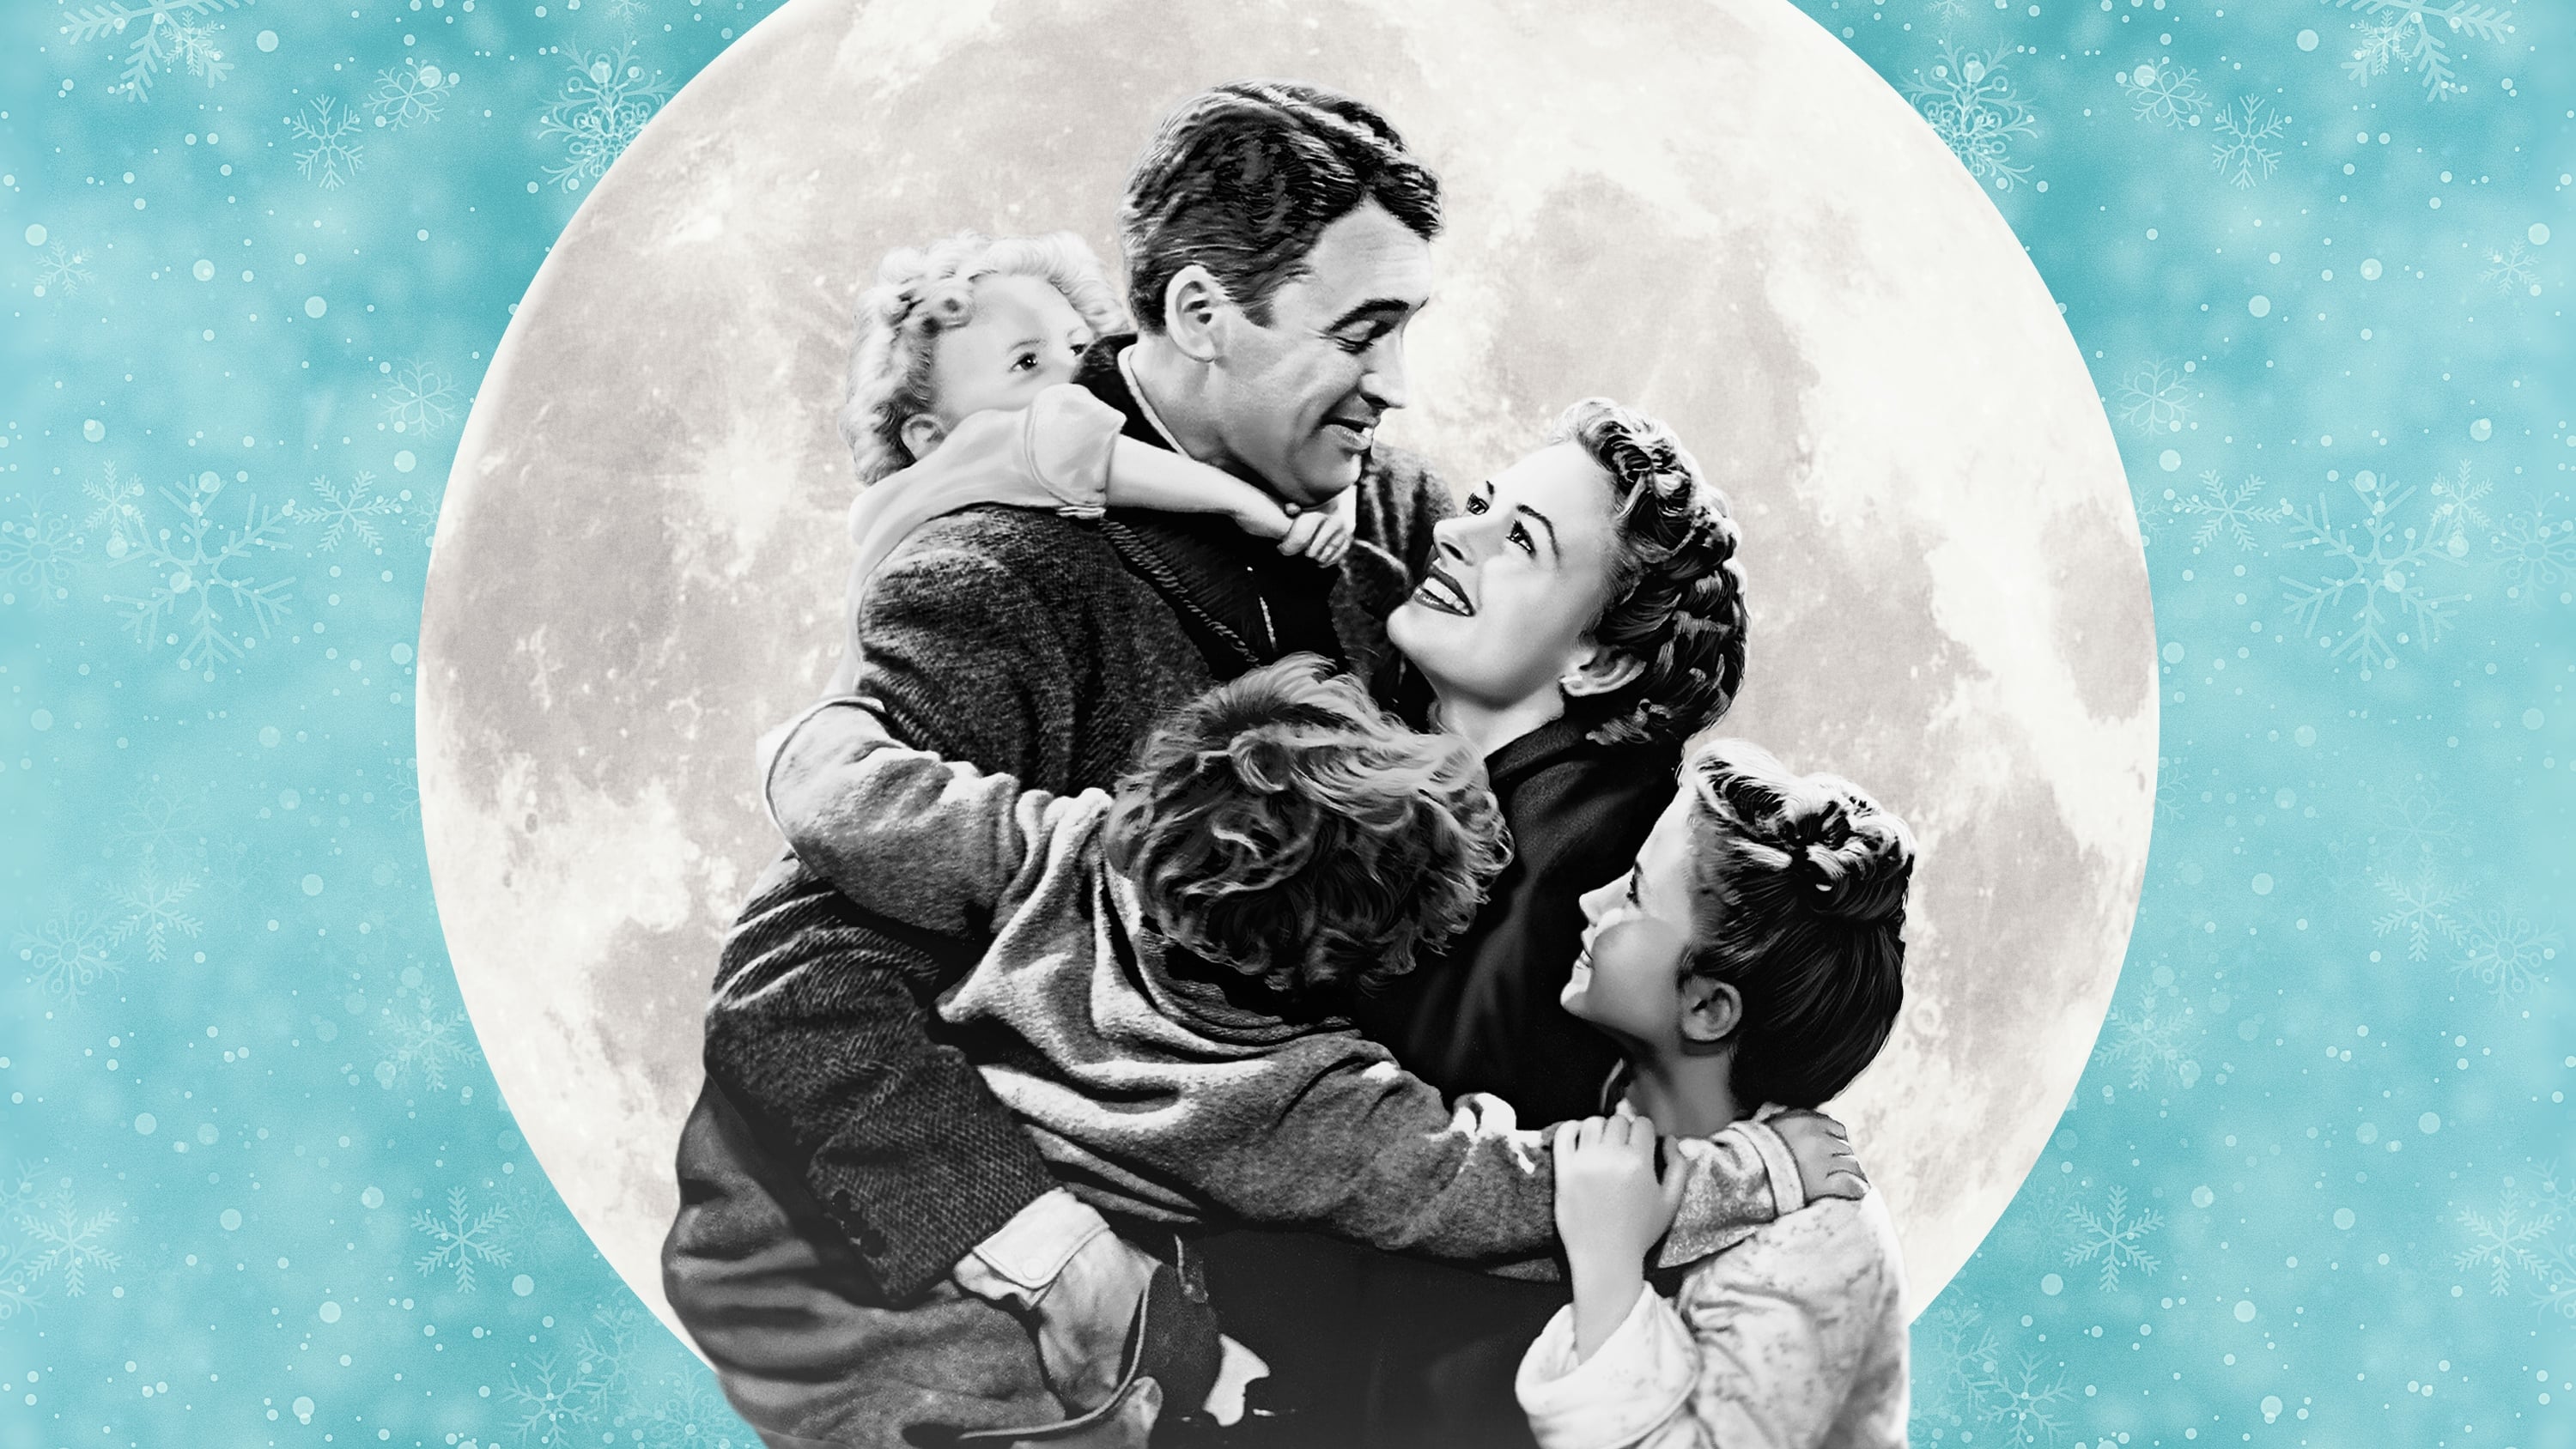 It's A Wonderful Life stands the test of time